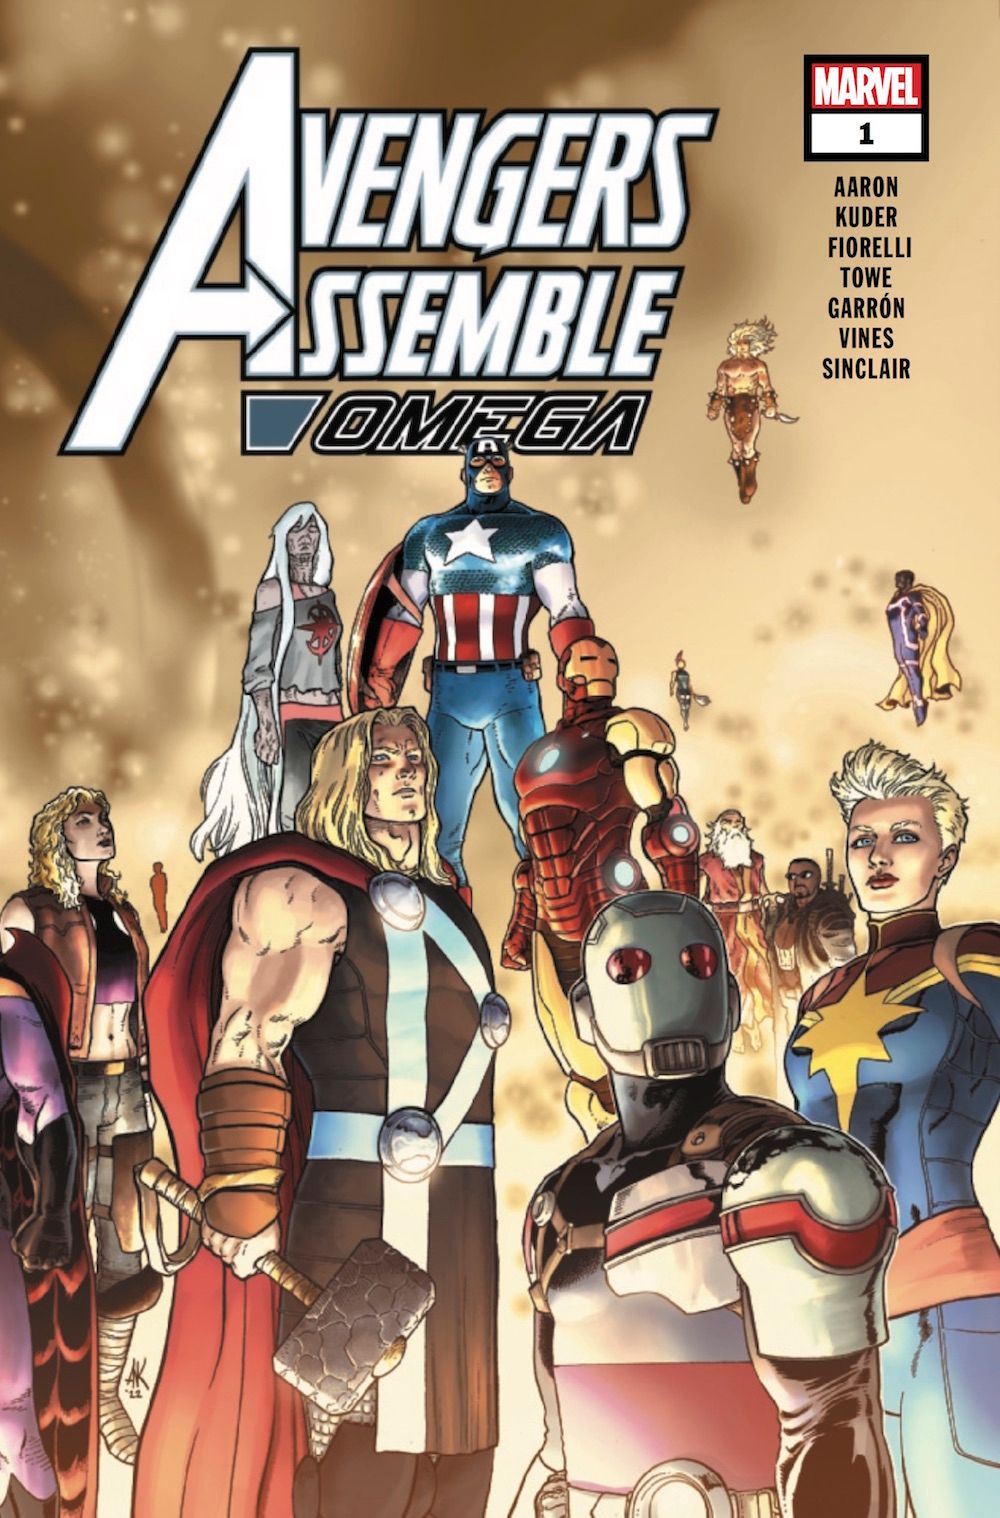 Thor, Captain America, Captain Marvel, and other heroes on the cover of Avengers Assemble Omega